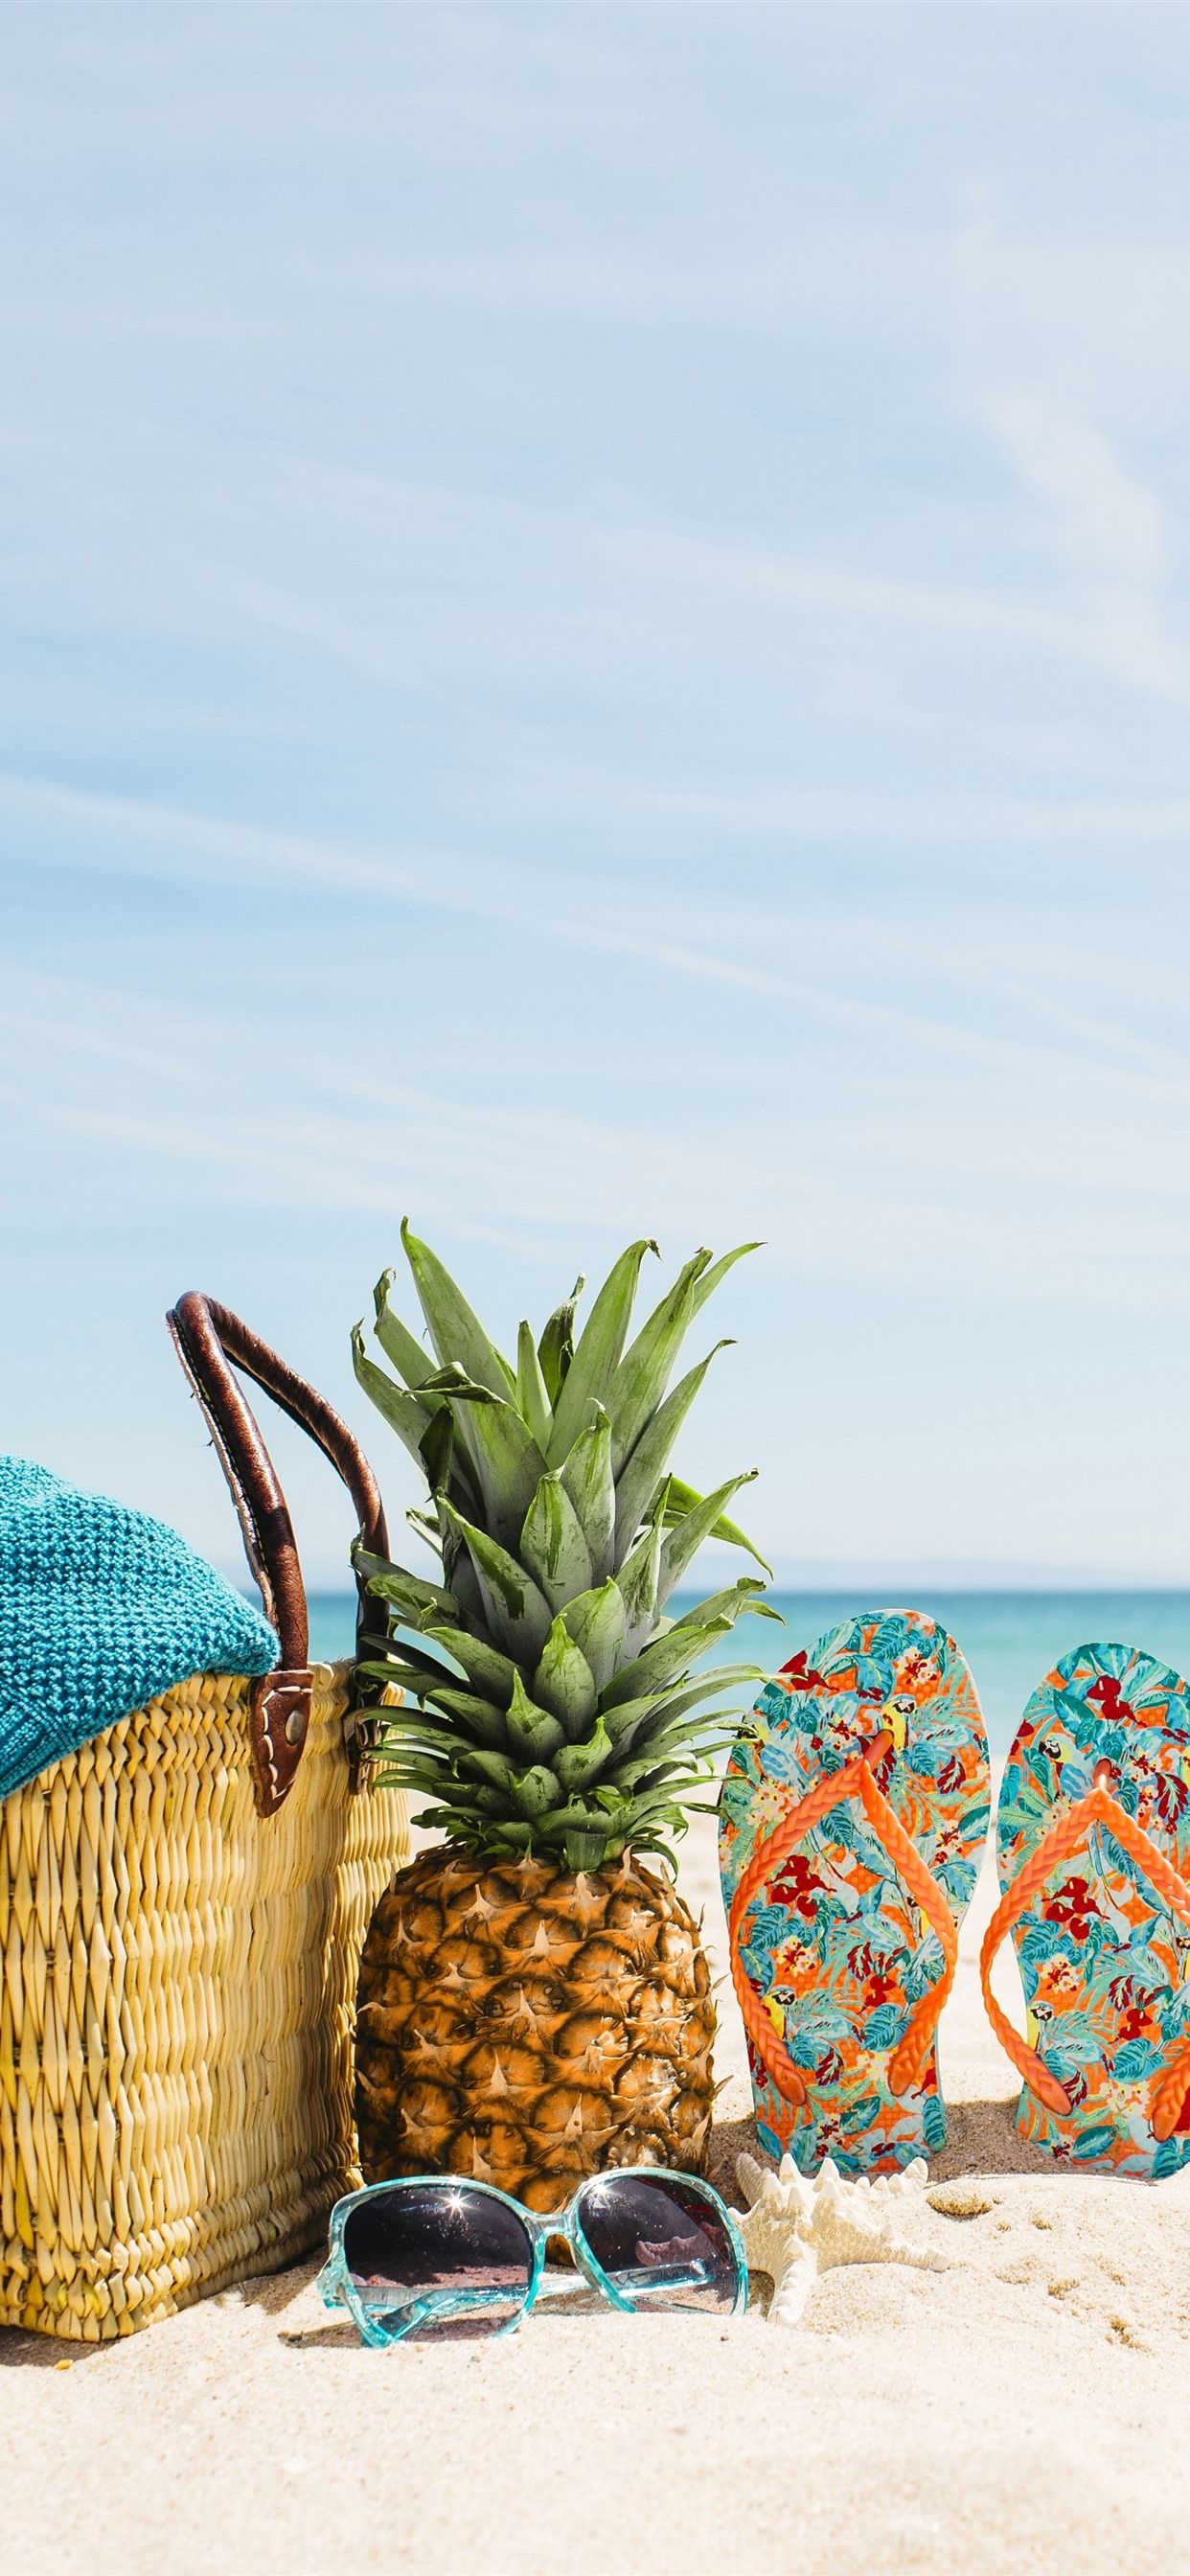 Beach, Summer, Sea, Sunglasses, Pineapple, Flops, Basket 1242x2688 IPhone 11 Pro XS Max Wallpaper, Background, Picture, Image